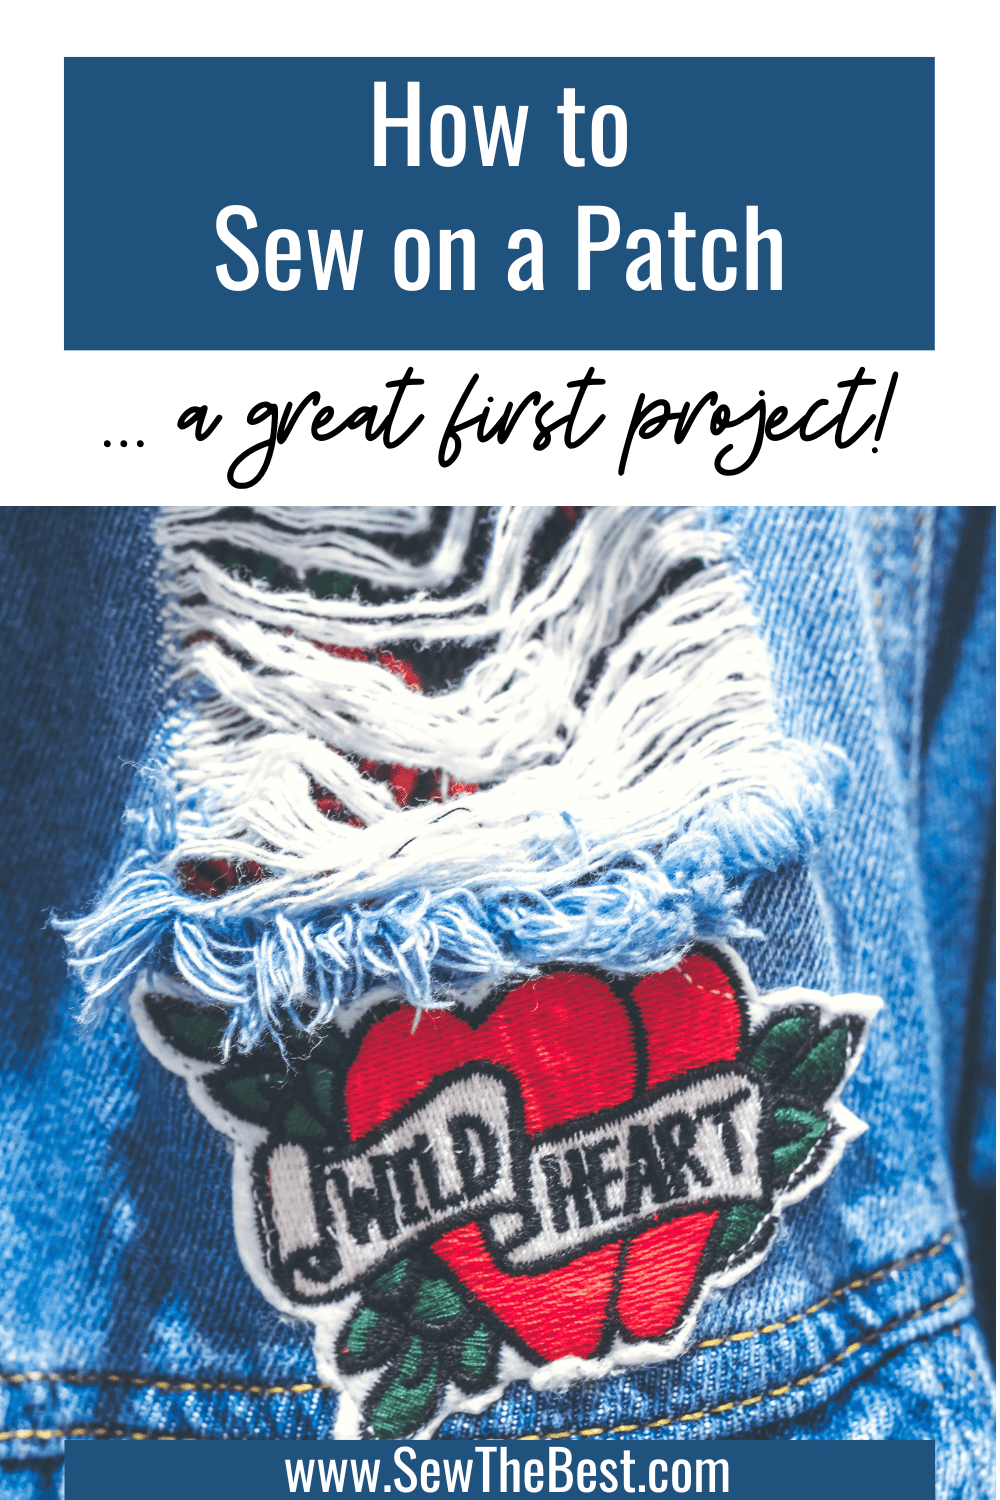 How to Sew on a Patch ... a great first project! Picture of a frayed piece of denim with a patch of two hears that says "Wild Heart" follows.